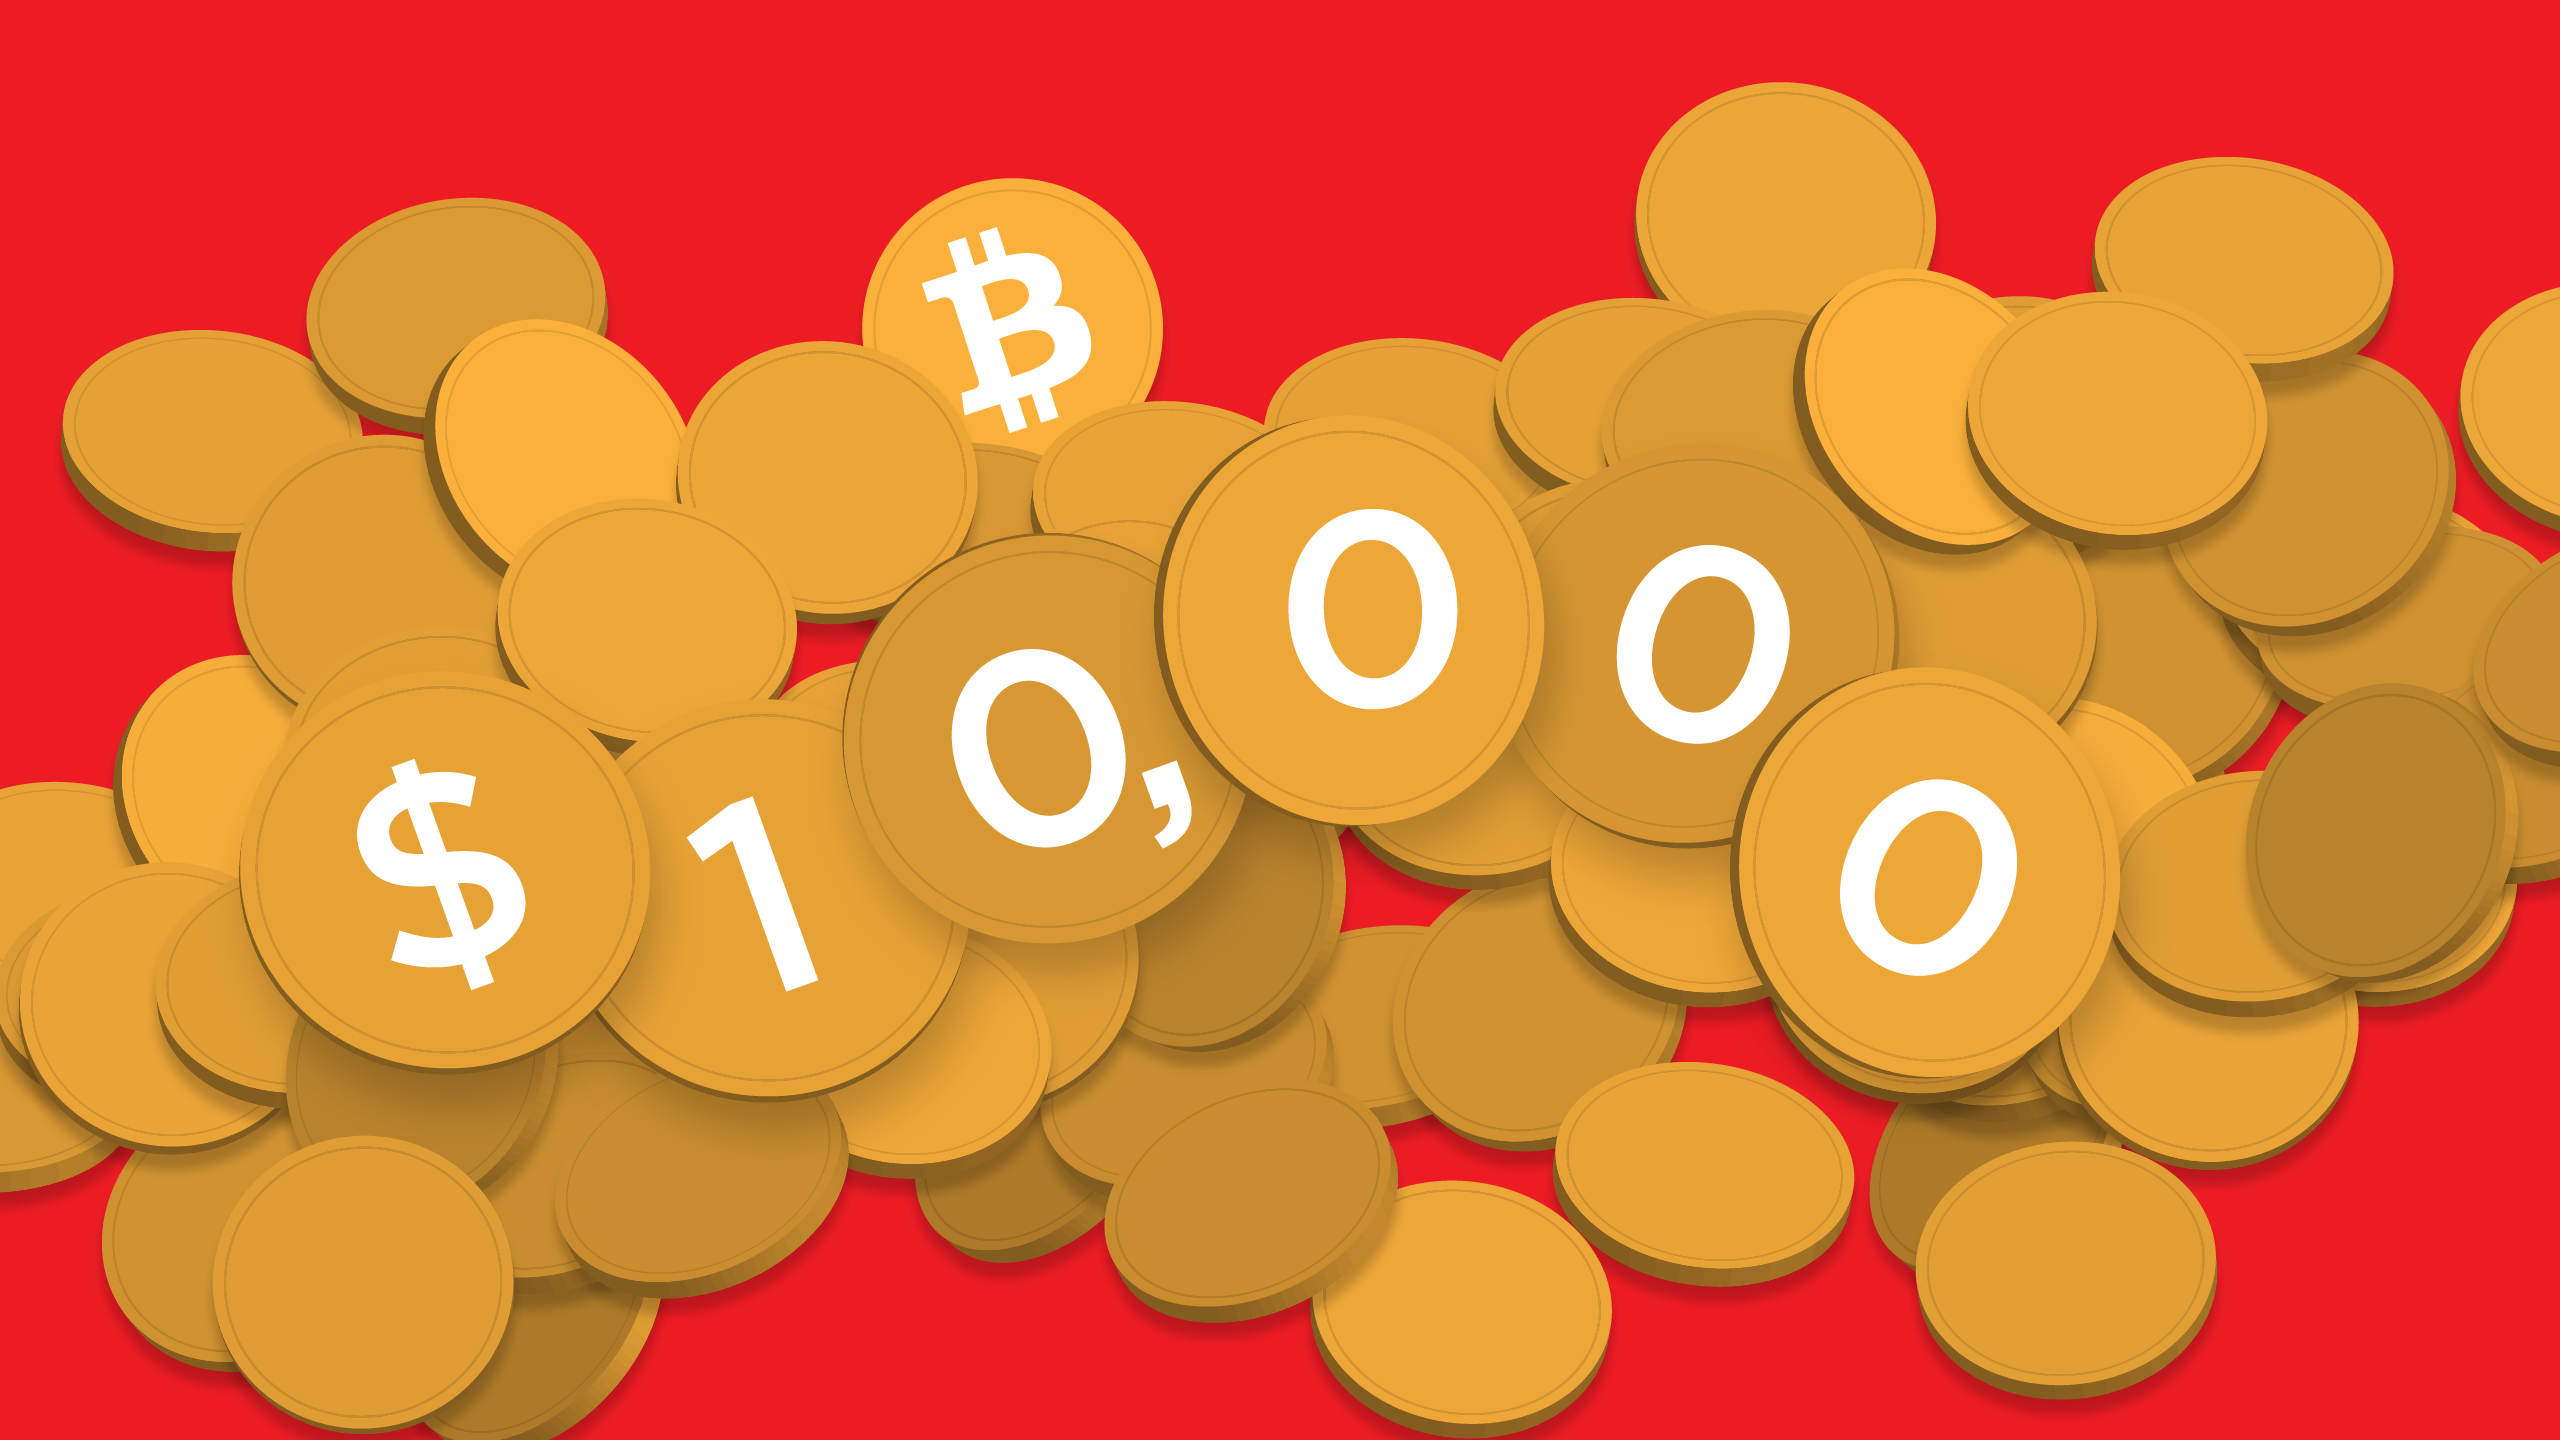 How much is bitcoins btc (BTC) to $ (USD) according to the foreign exchange rate for today